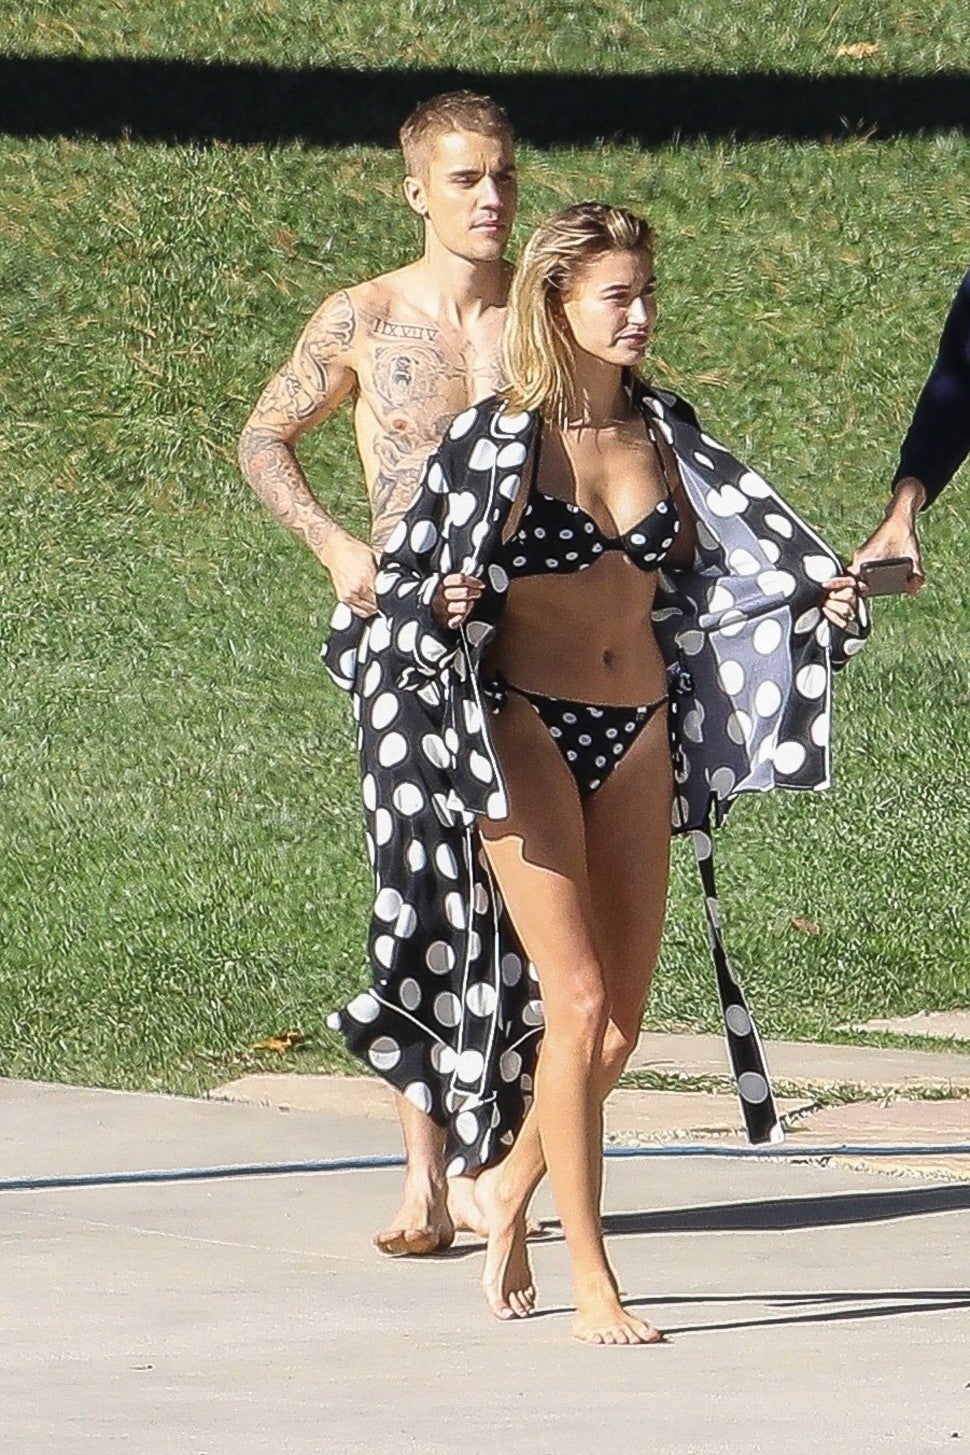 Justin Bieber and wife Hailey Baldwin pose for a photoshoot in the Hollywood Hills on Dec. 4